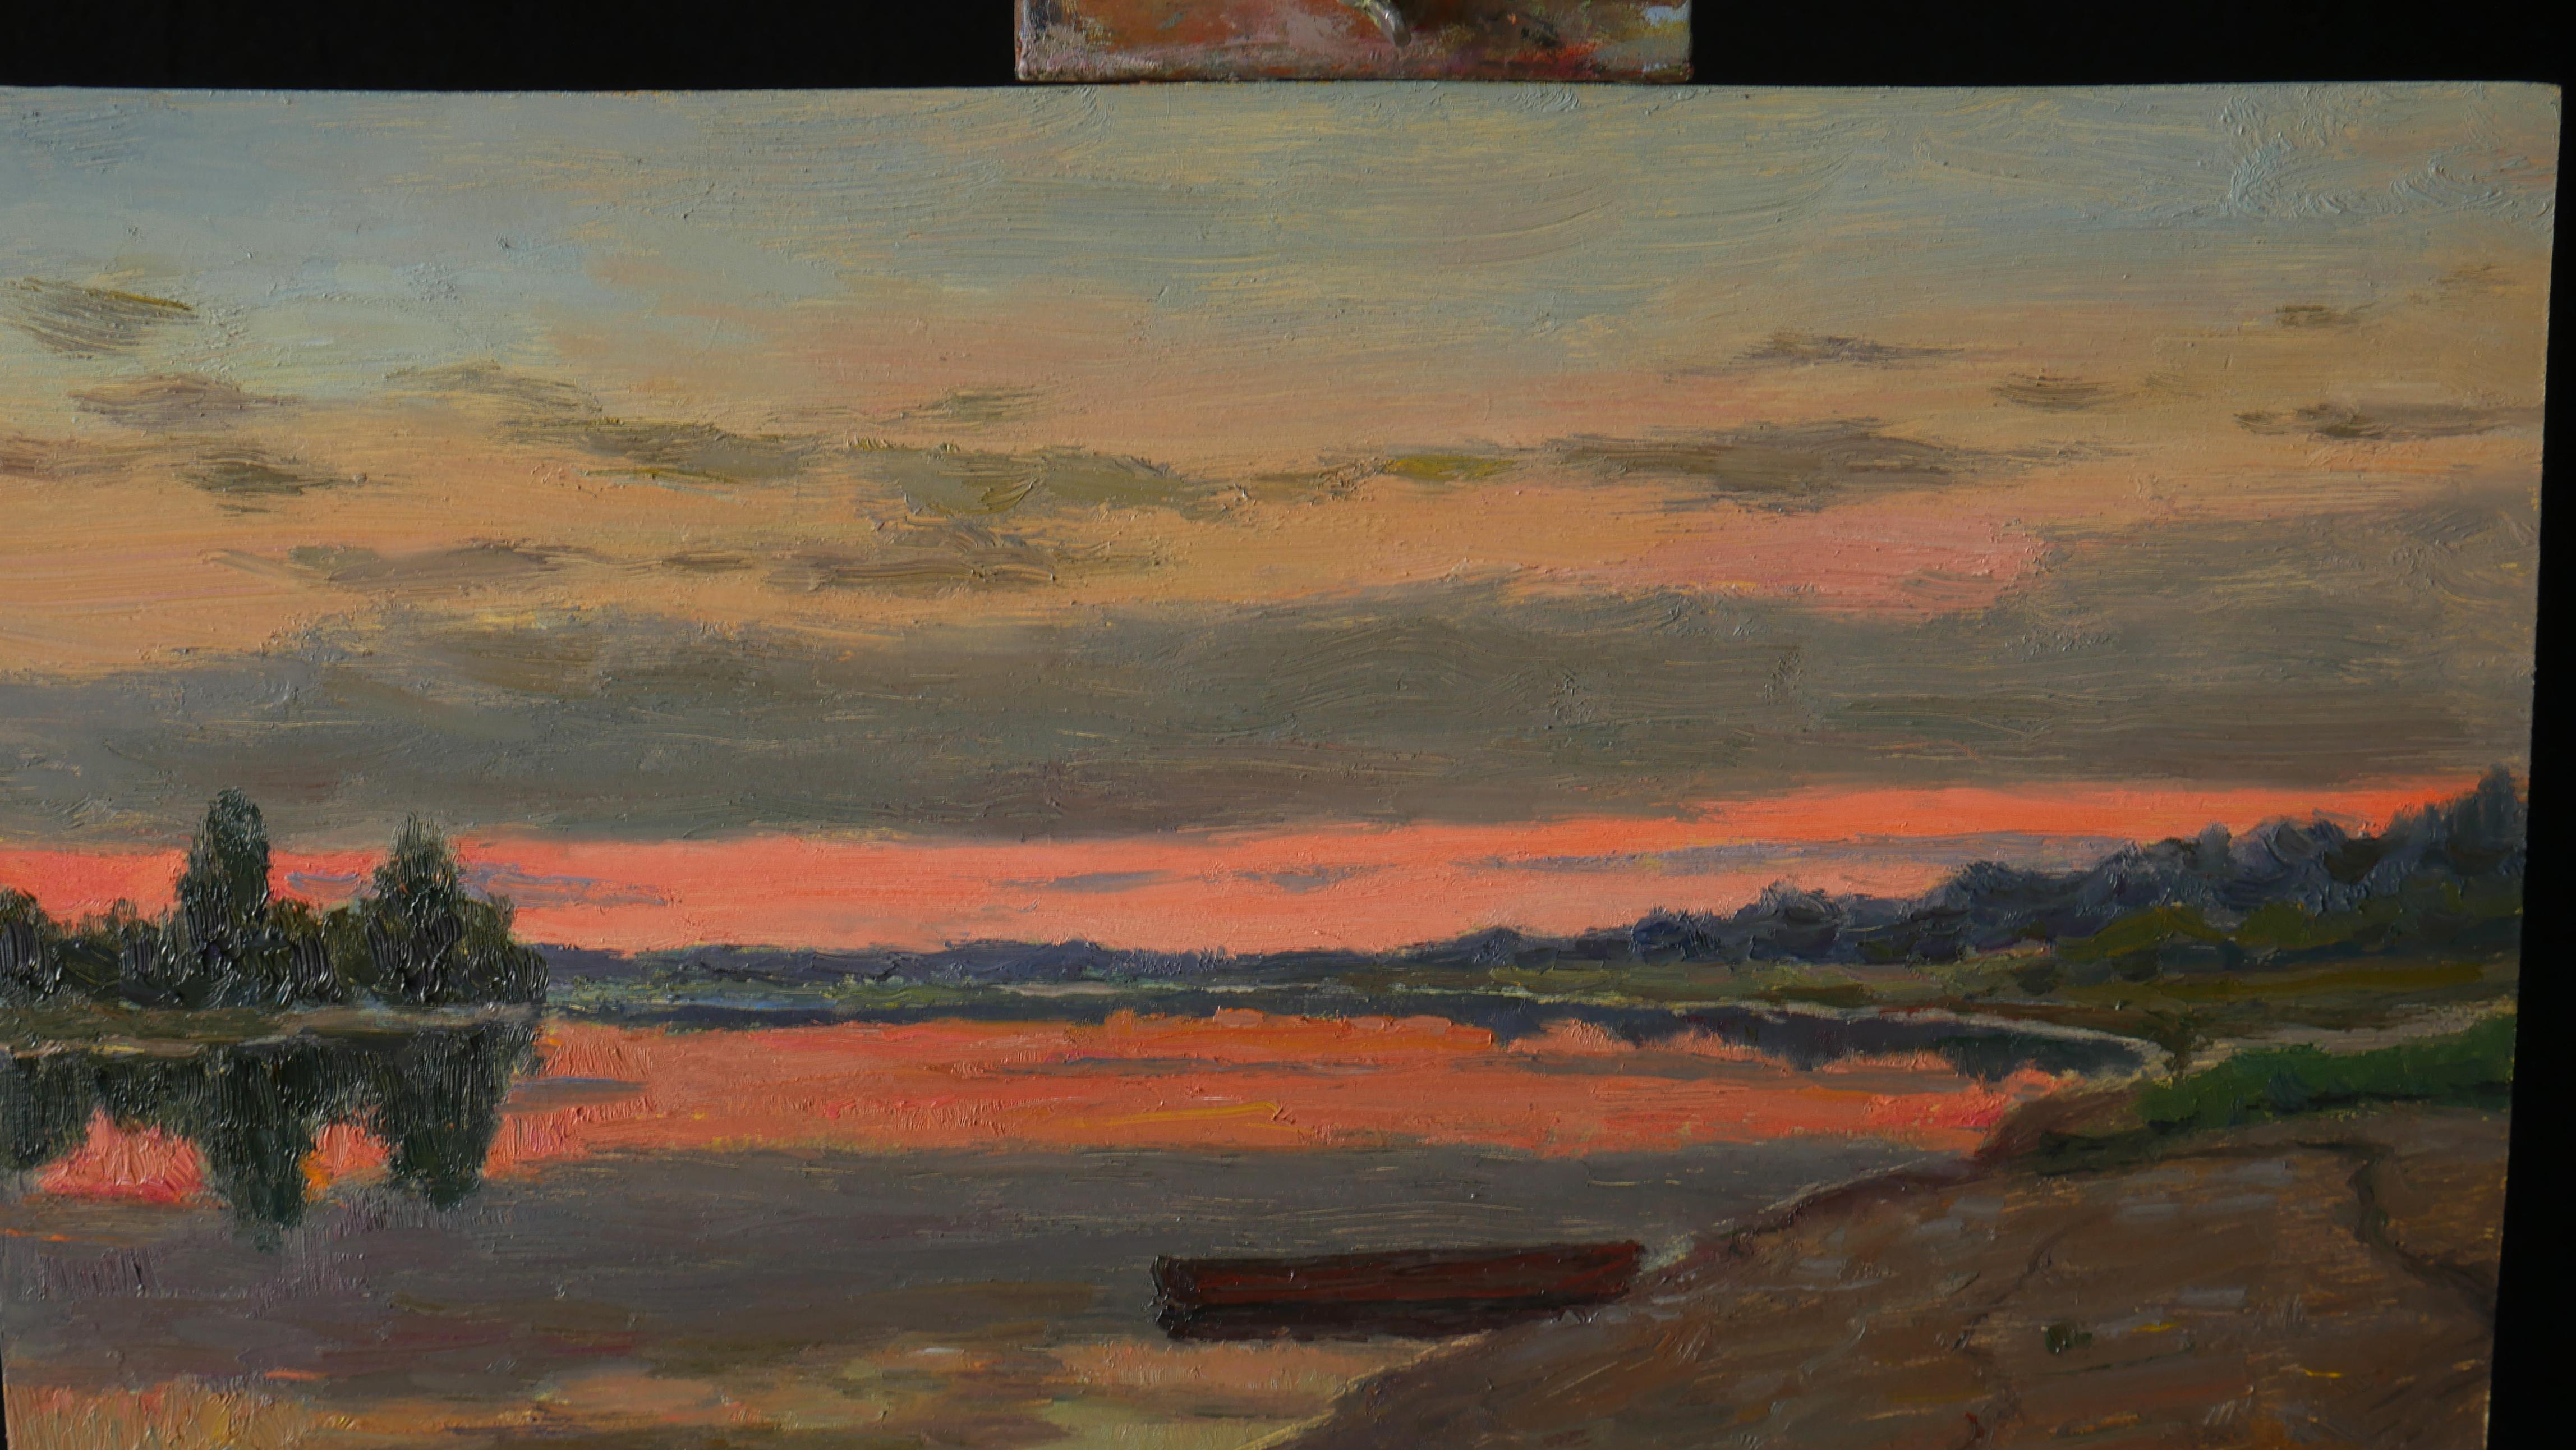 At The Silent Bank - sunset landscape painting For Sale 1